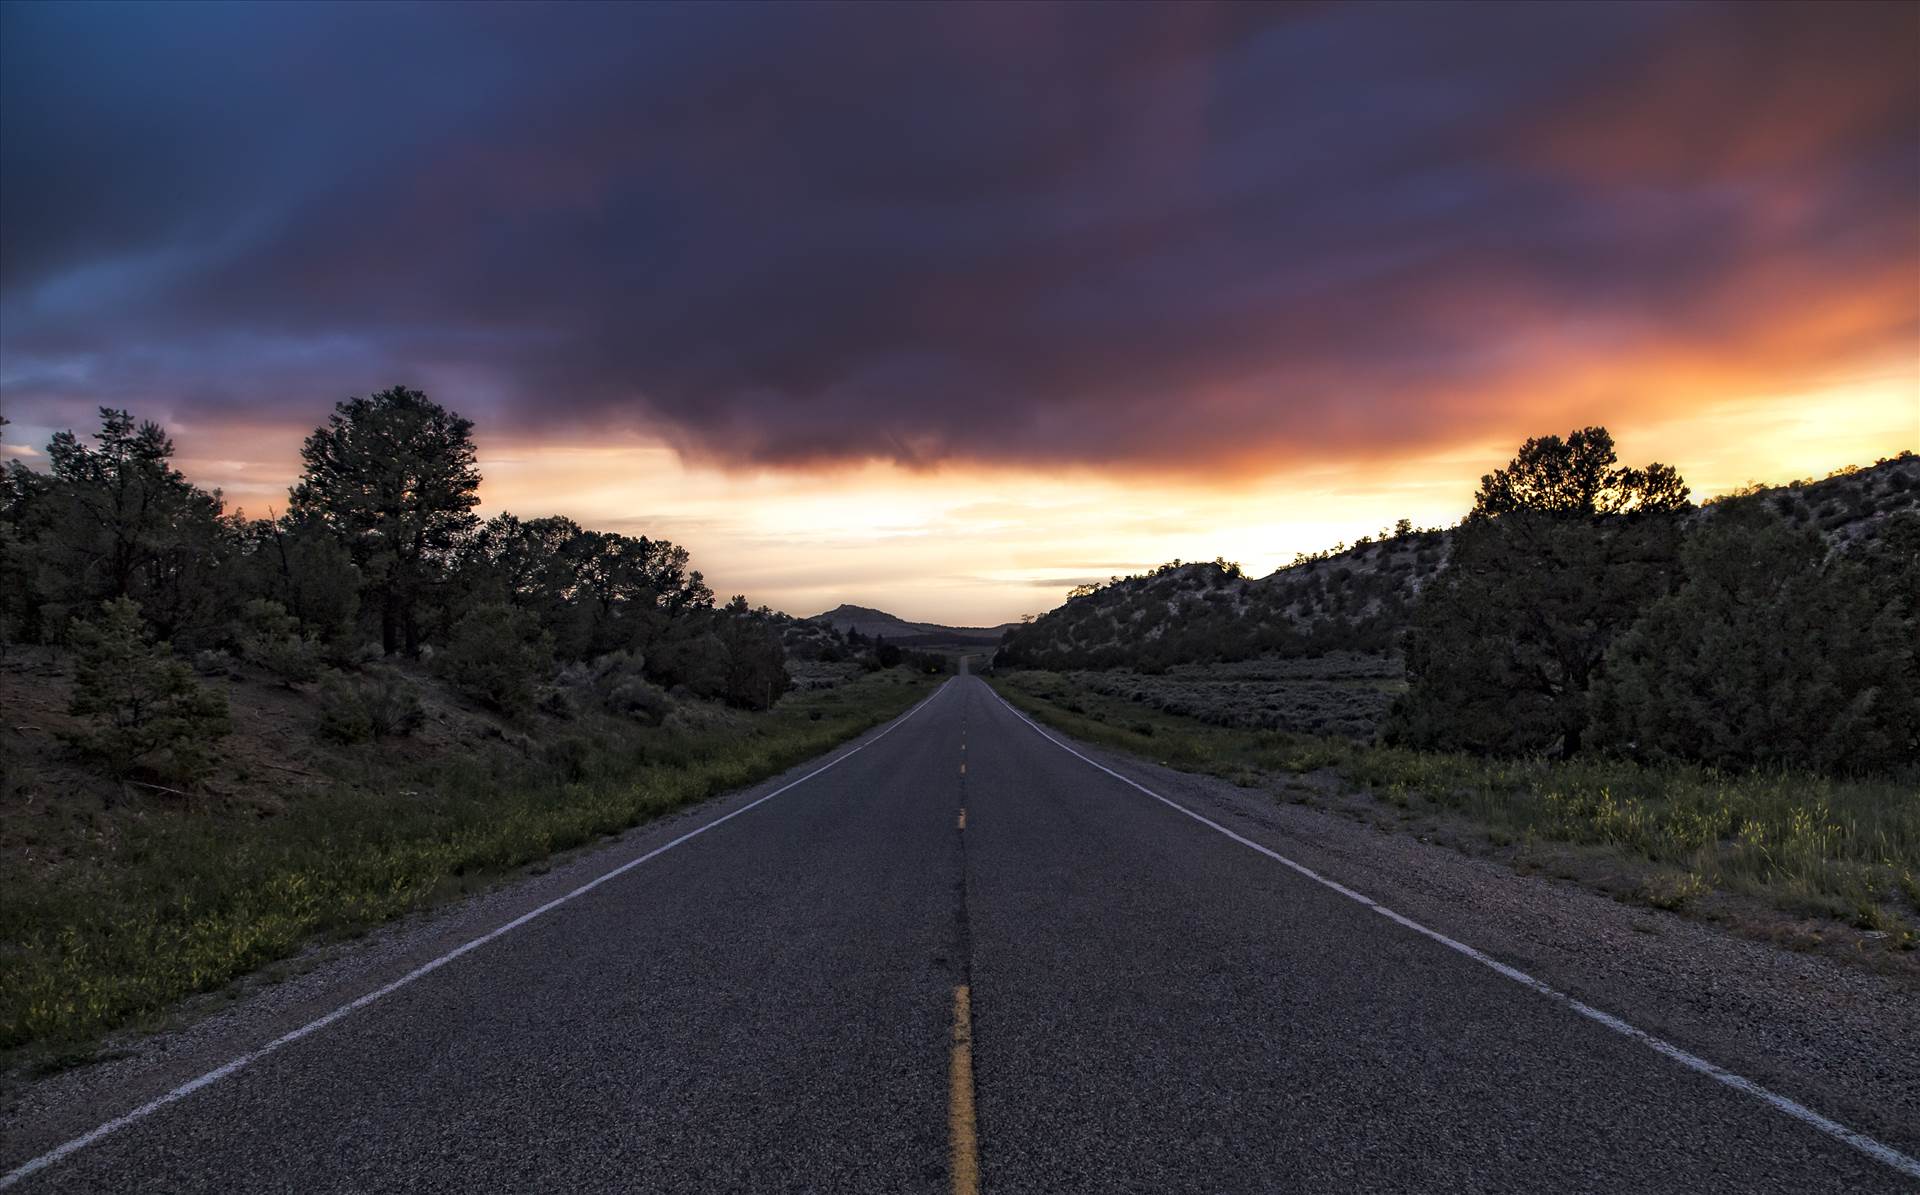 Road From Gallina New Mexico.jpg undefined by Joey Onyxone Sandoval